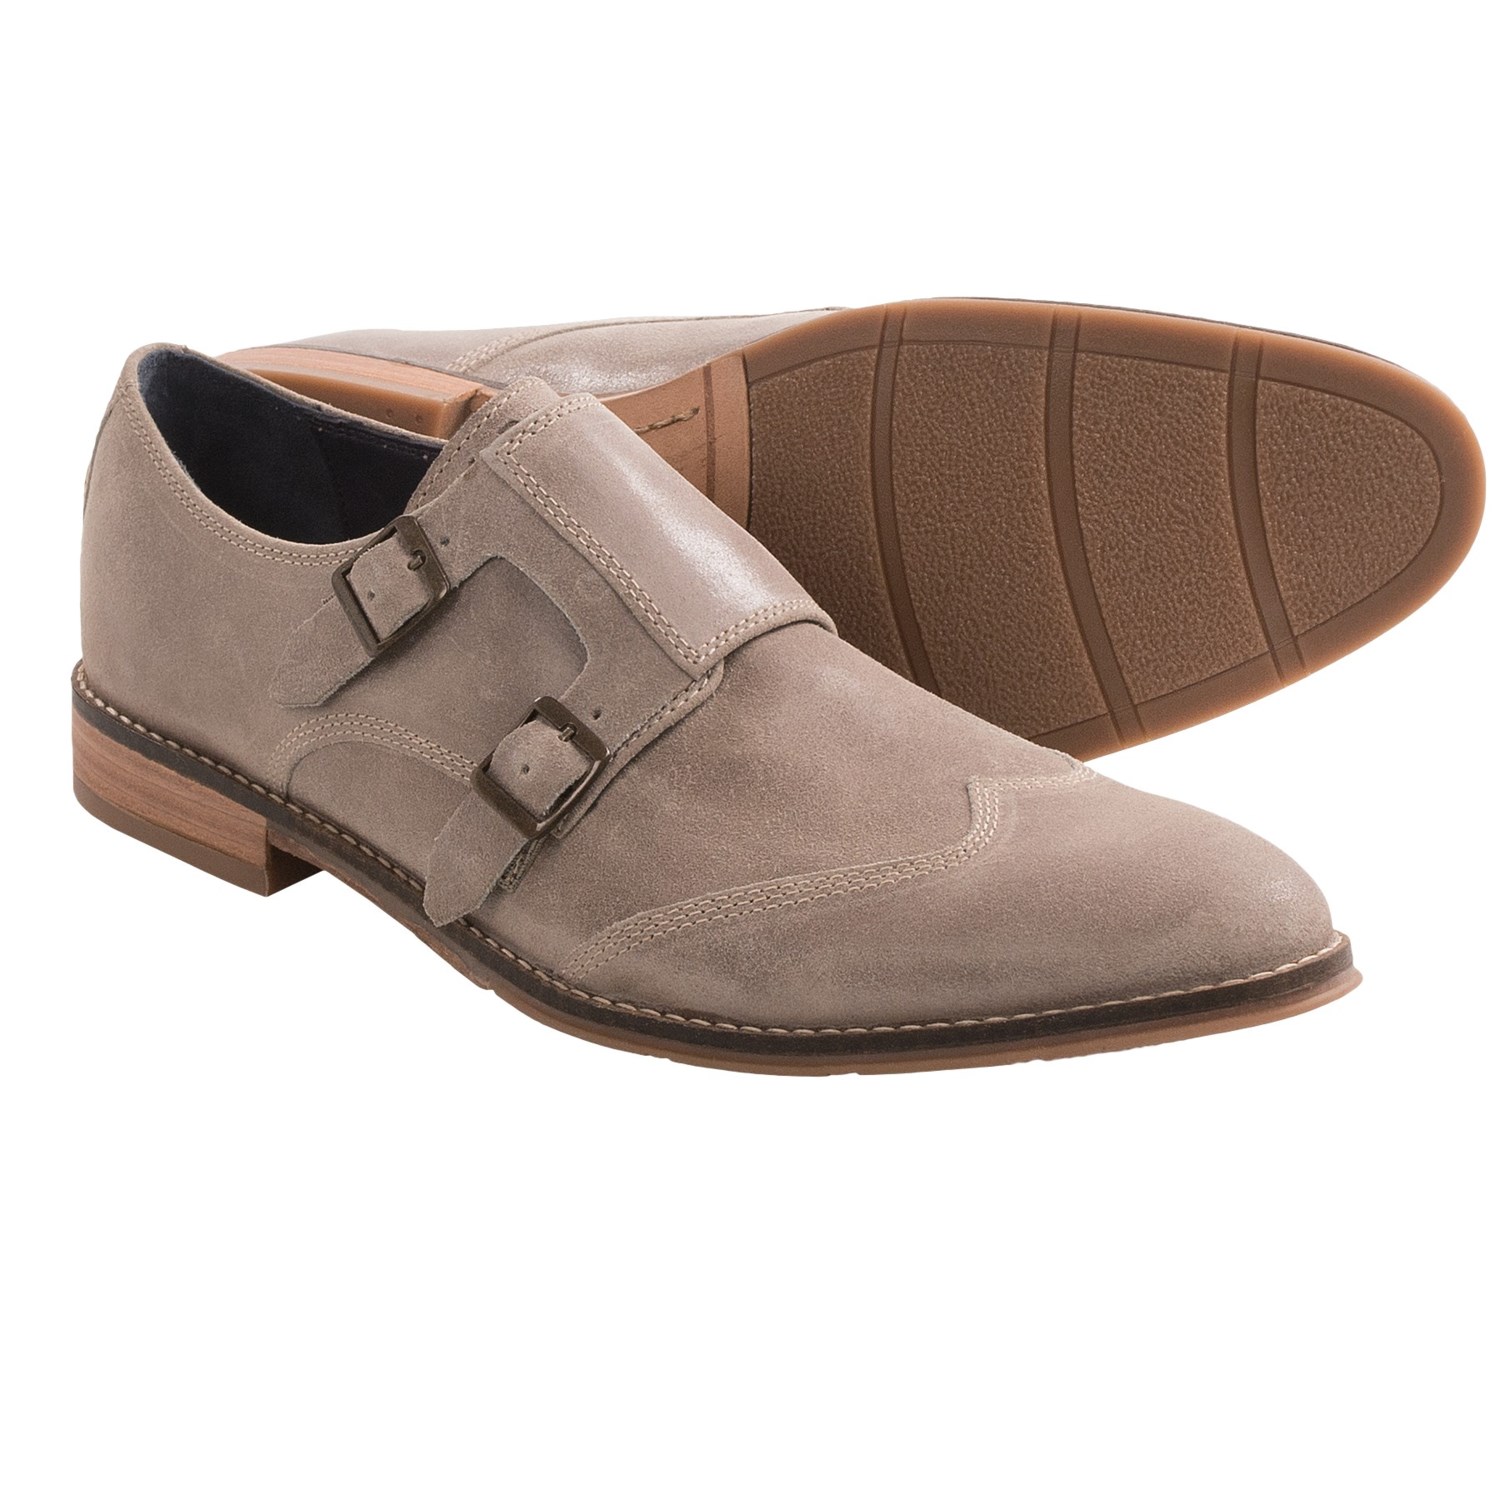 Hush Puppies Style Monk Strap Shoes (For Men) in Taupe Suede